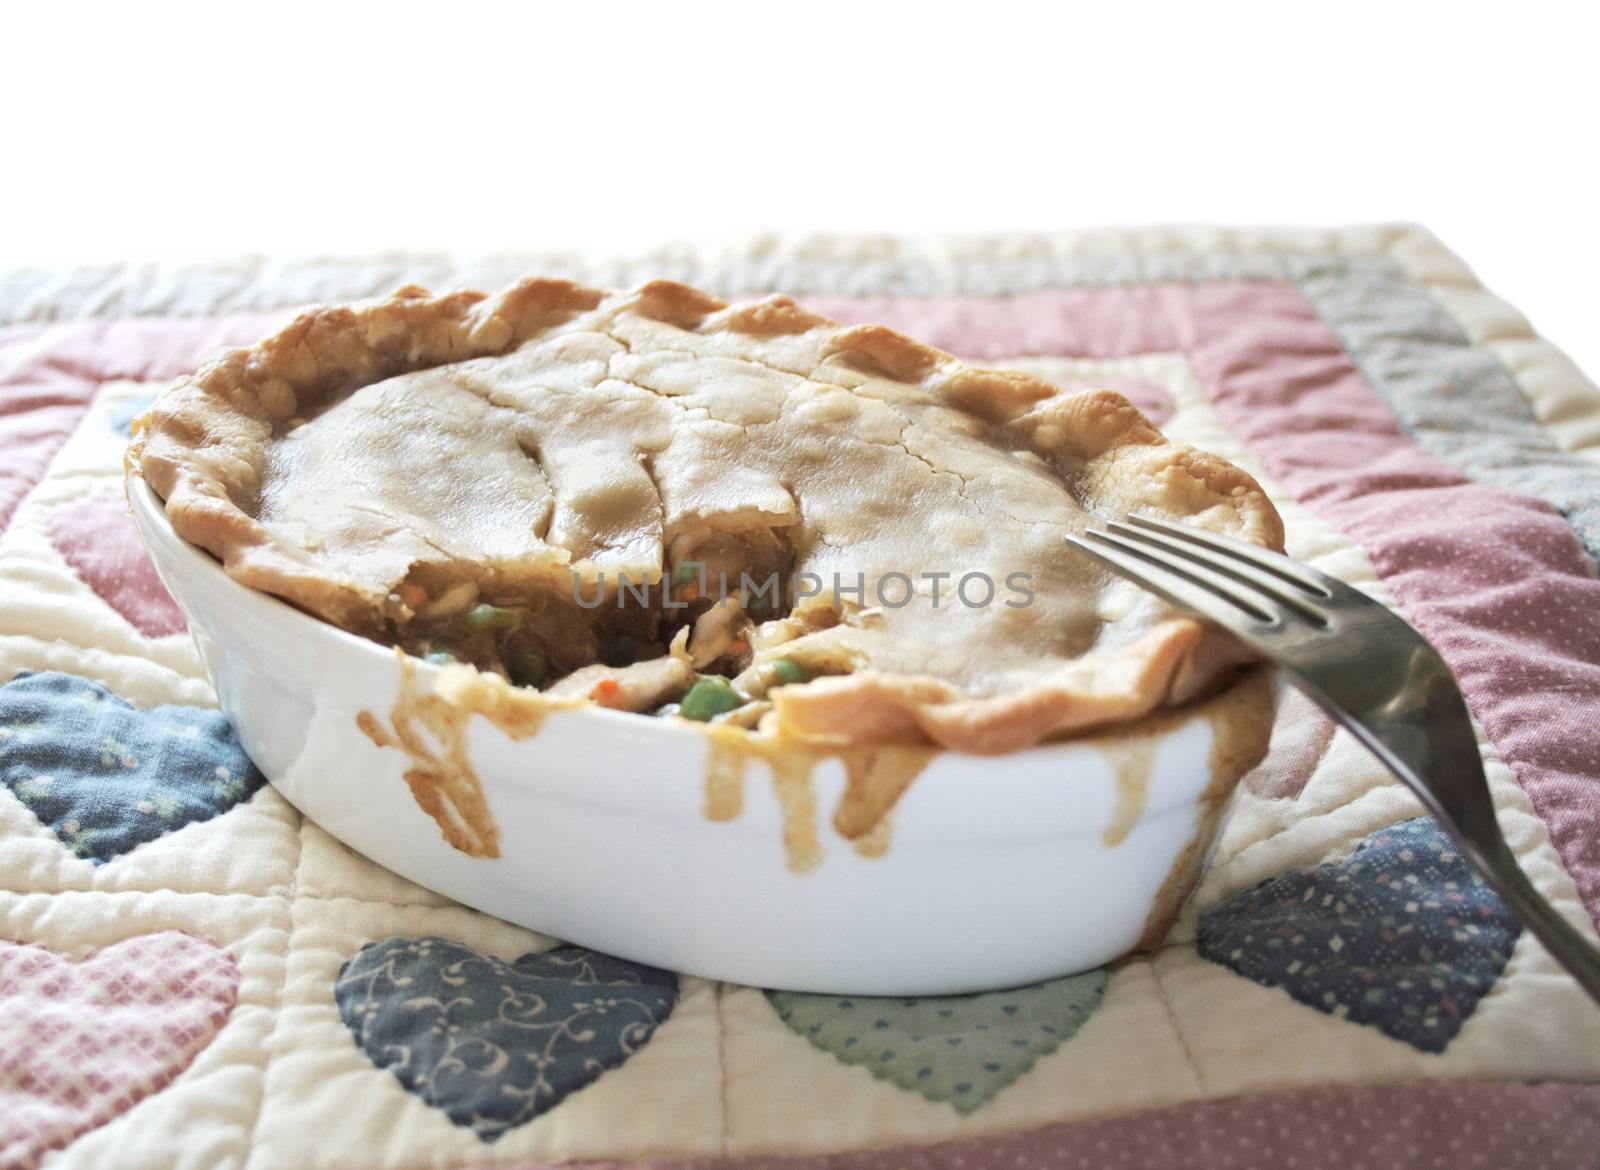 a chicken potpie in an individual casserole dish on a quilted place mat with calico hearts